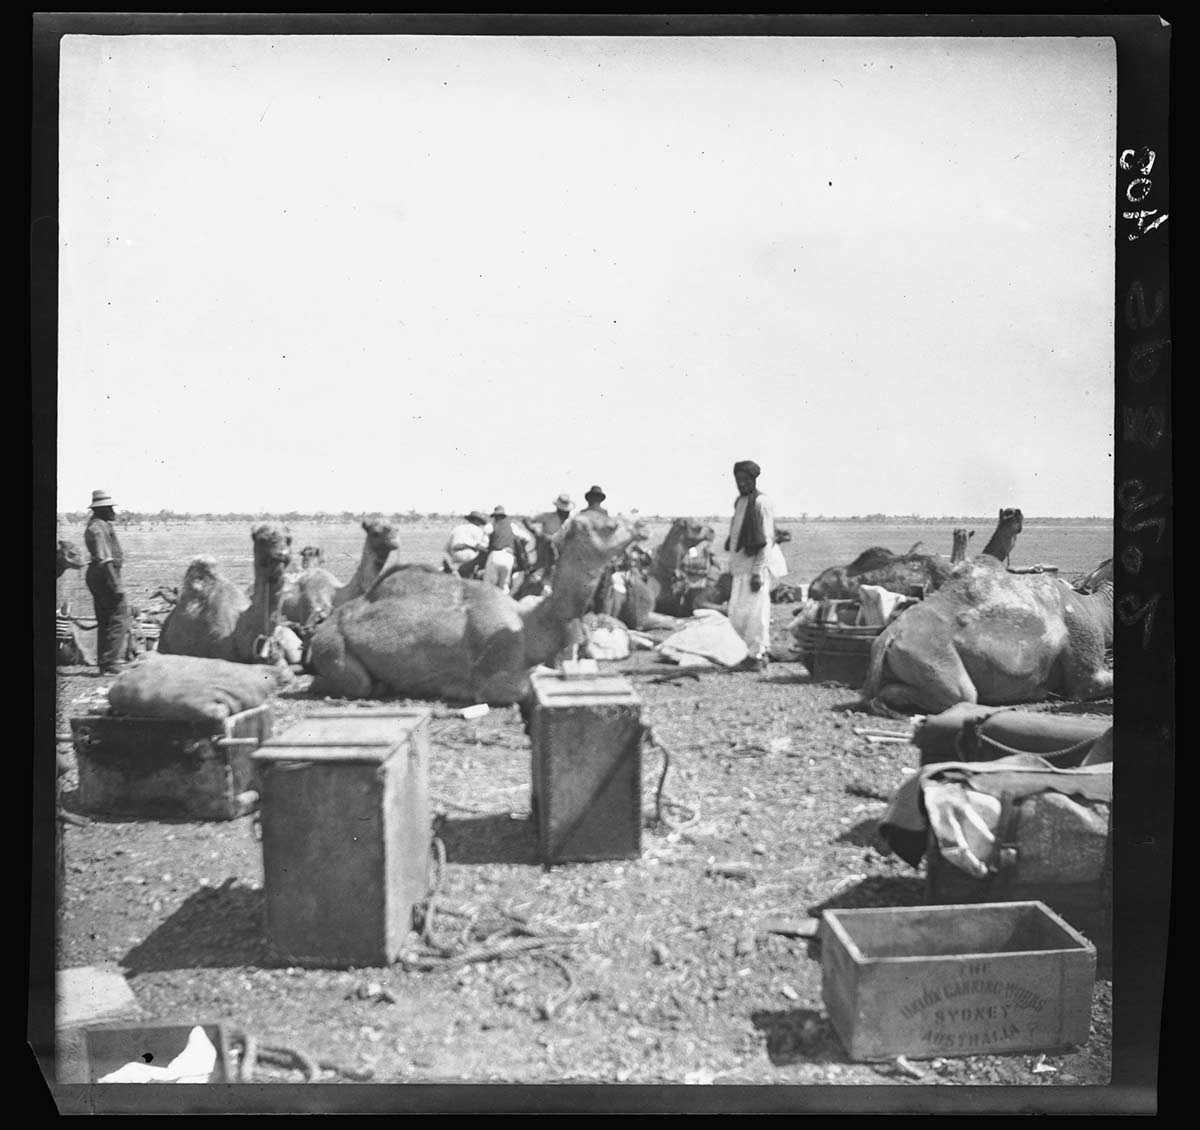 Oodnadatta campsite with camels, expedition members and equipment, South Australia 1903. In the foreground are two large wooden enclosed boxes and a smaller open box. Behind them are seven camels at rest on the ground. In amongst them are expedition team members; some appear to be carrying equipment or camping stores. Standing in the middle ground facing the camera appears to be an Afghan camel driver. The campsite is on a vast open plain. Trees on the horizon behind the group are quite some distance away. - click to view larger image